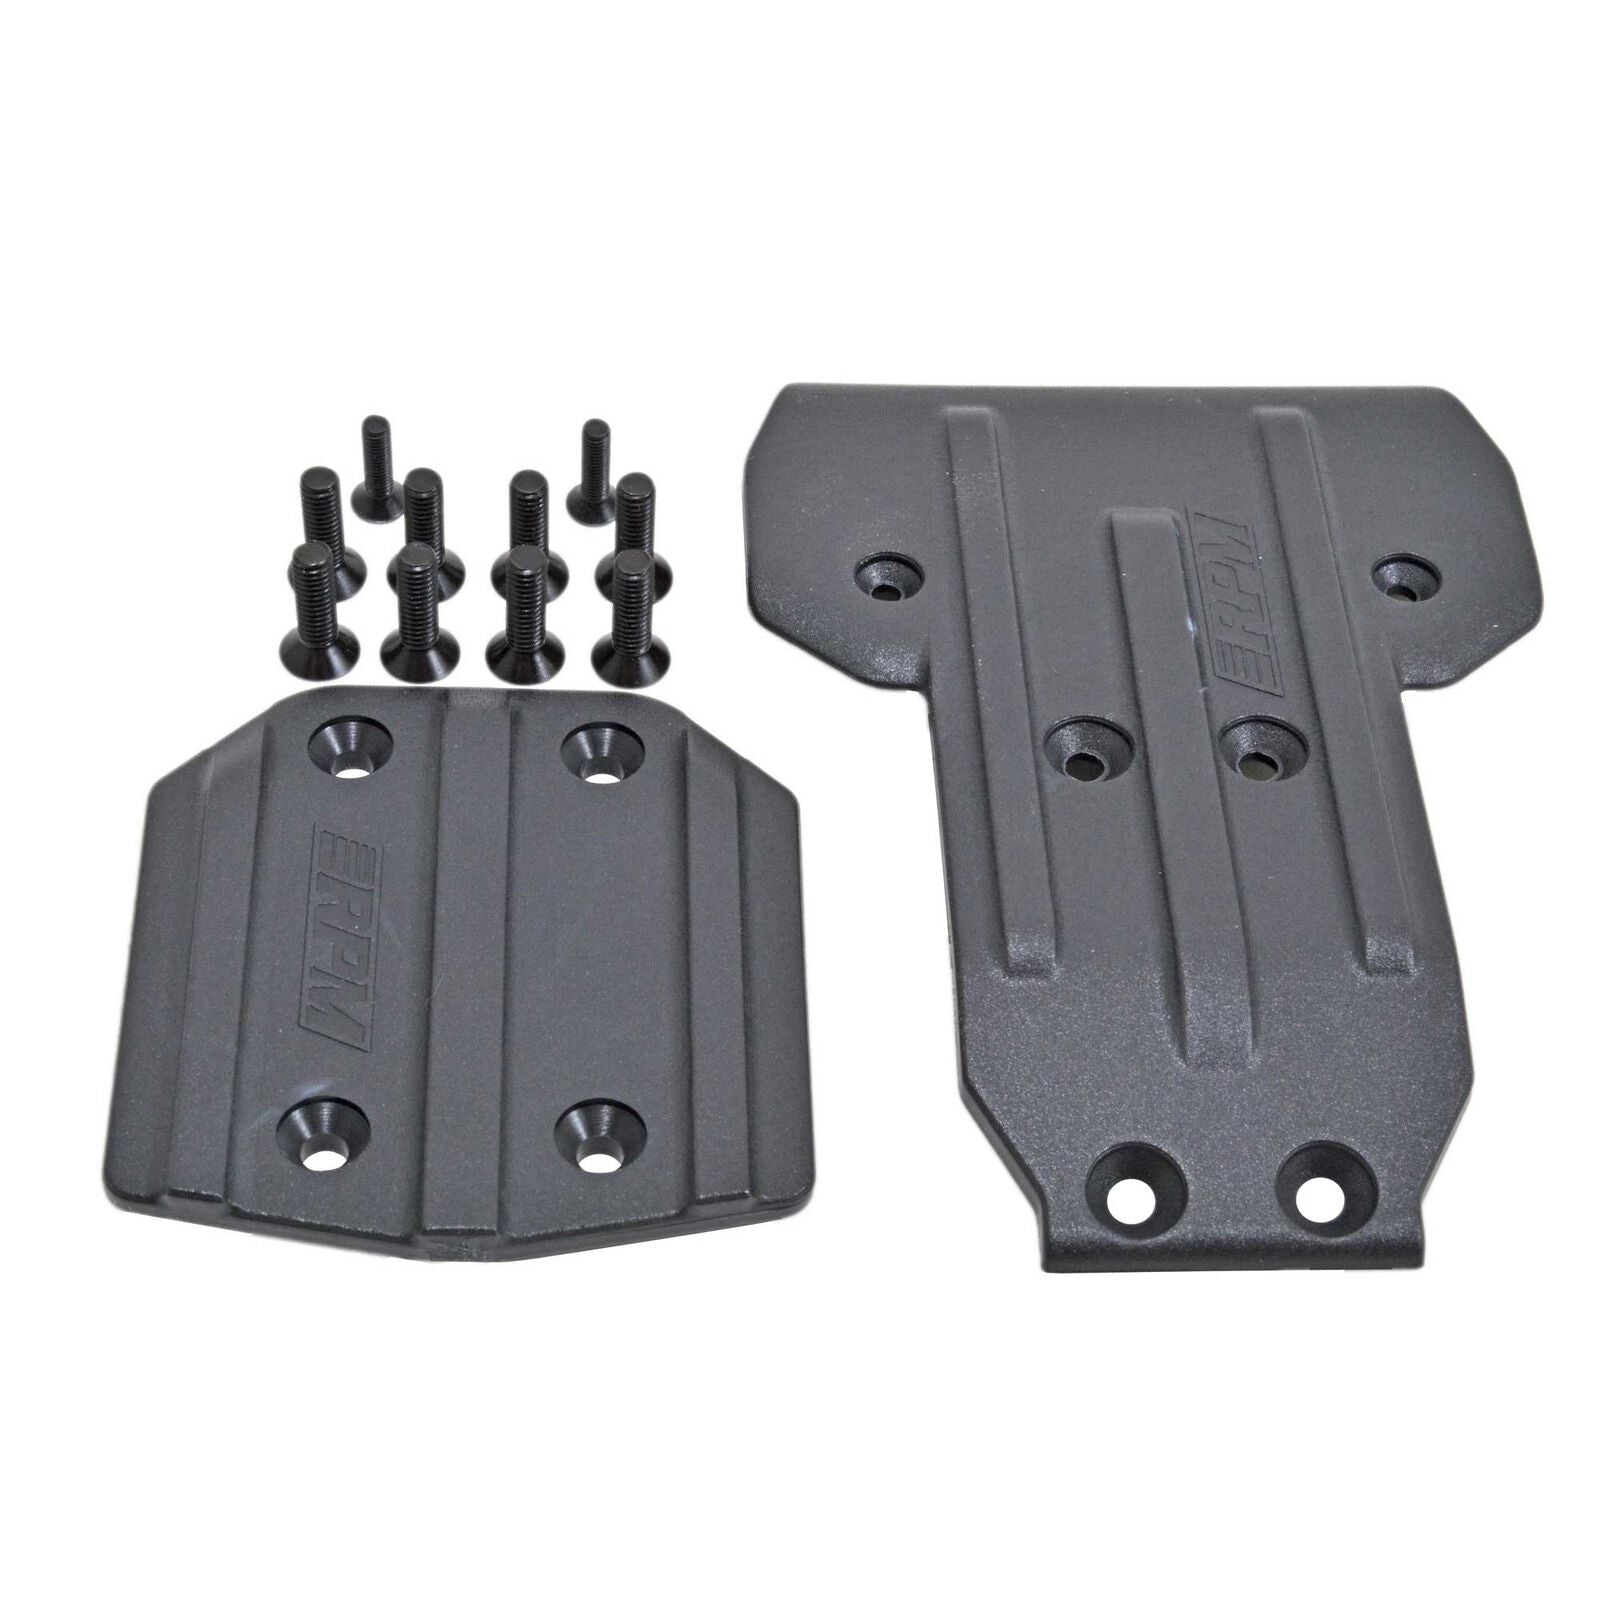 RPM 73182 Front & Rear Skid Plates for the Losi Tenacity SCT,T & DB